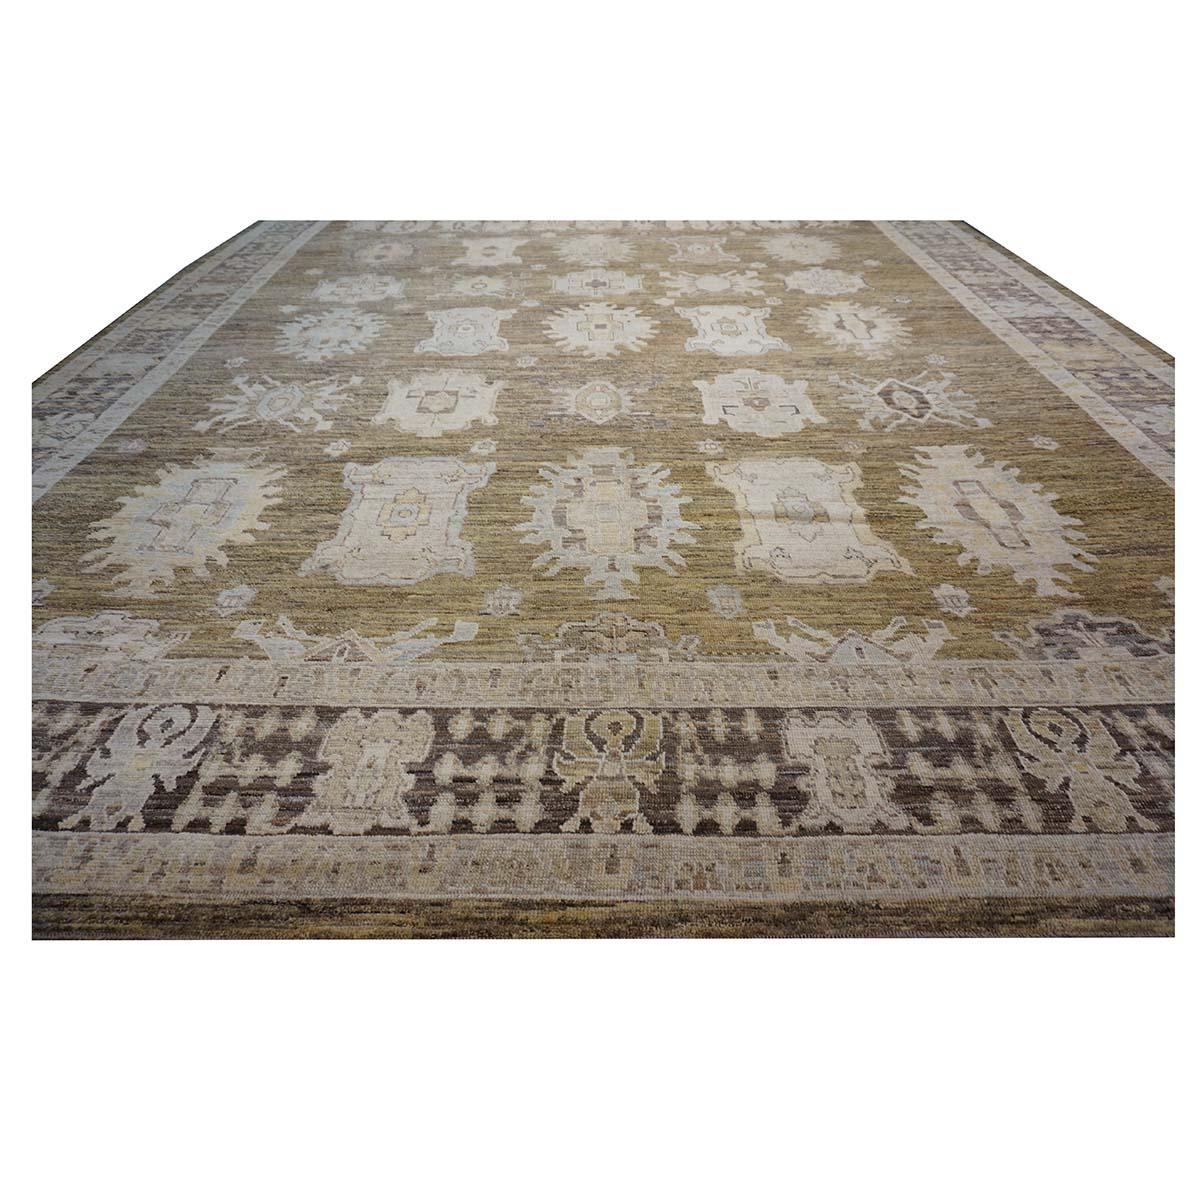 Ashly Fine Rugs presents a 21st century Turkish Oushak 15x23 Oversized Rug. Oushak weavings began in a location just south of Istanbul, in a region that was to become the rugs namesake, Oushak. Although nomads first produced the rugs for personal